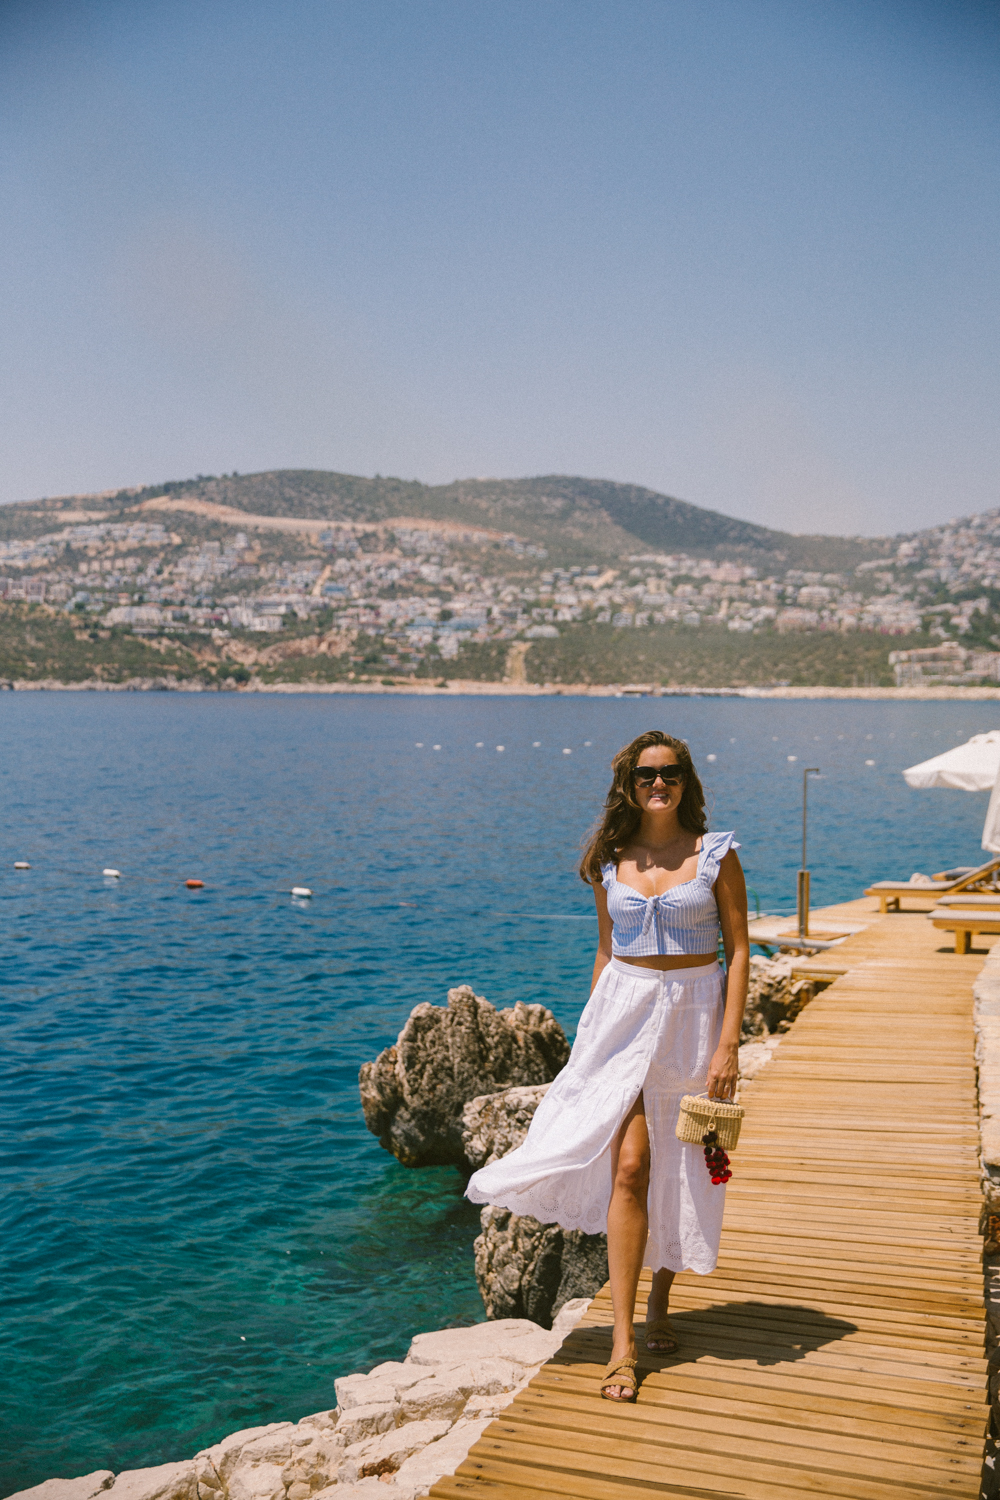 Postcards from Turkey - The Londoner